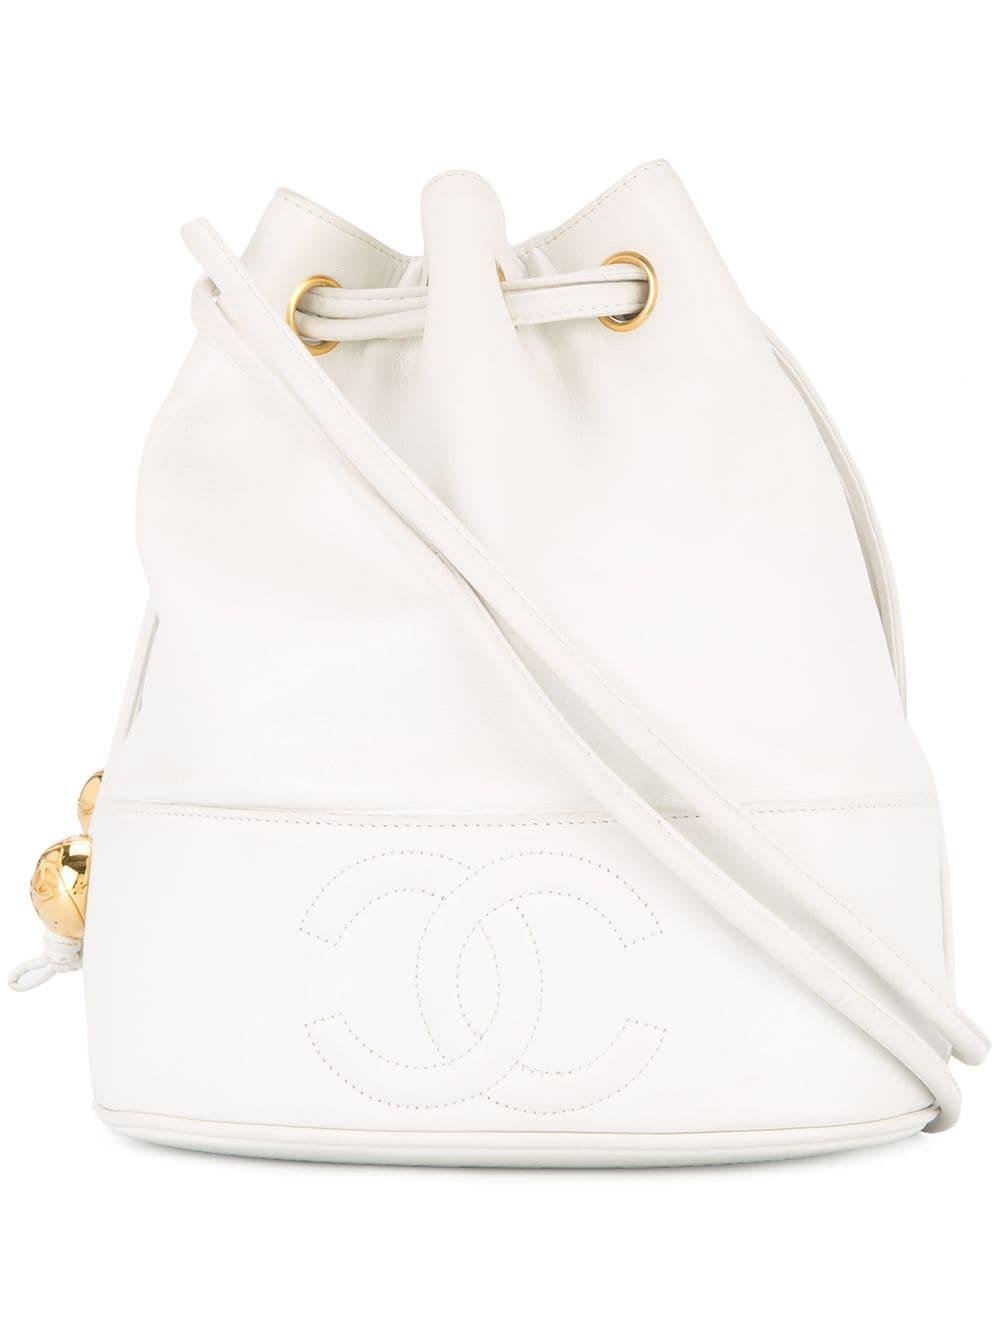 Chanel Pre-Owned Logos Bucket Bag in White